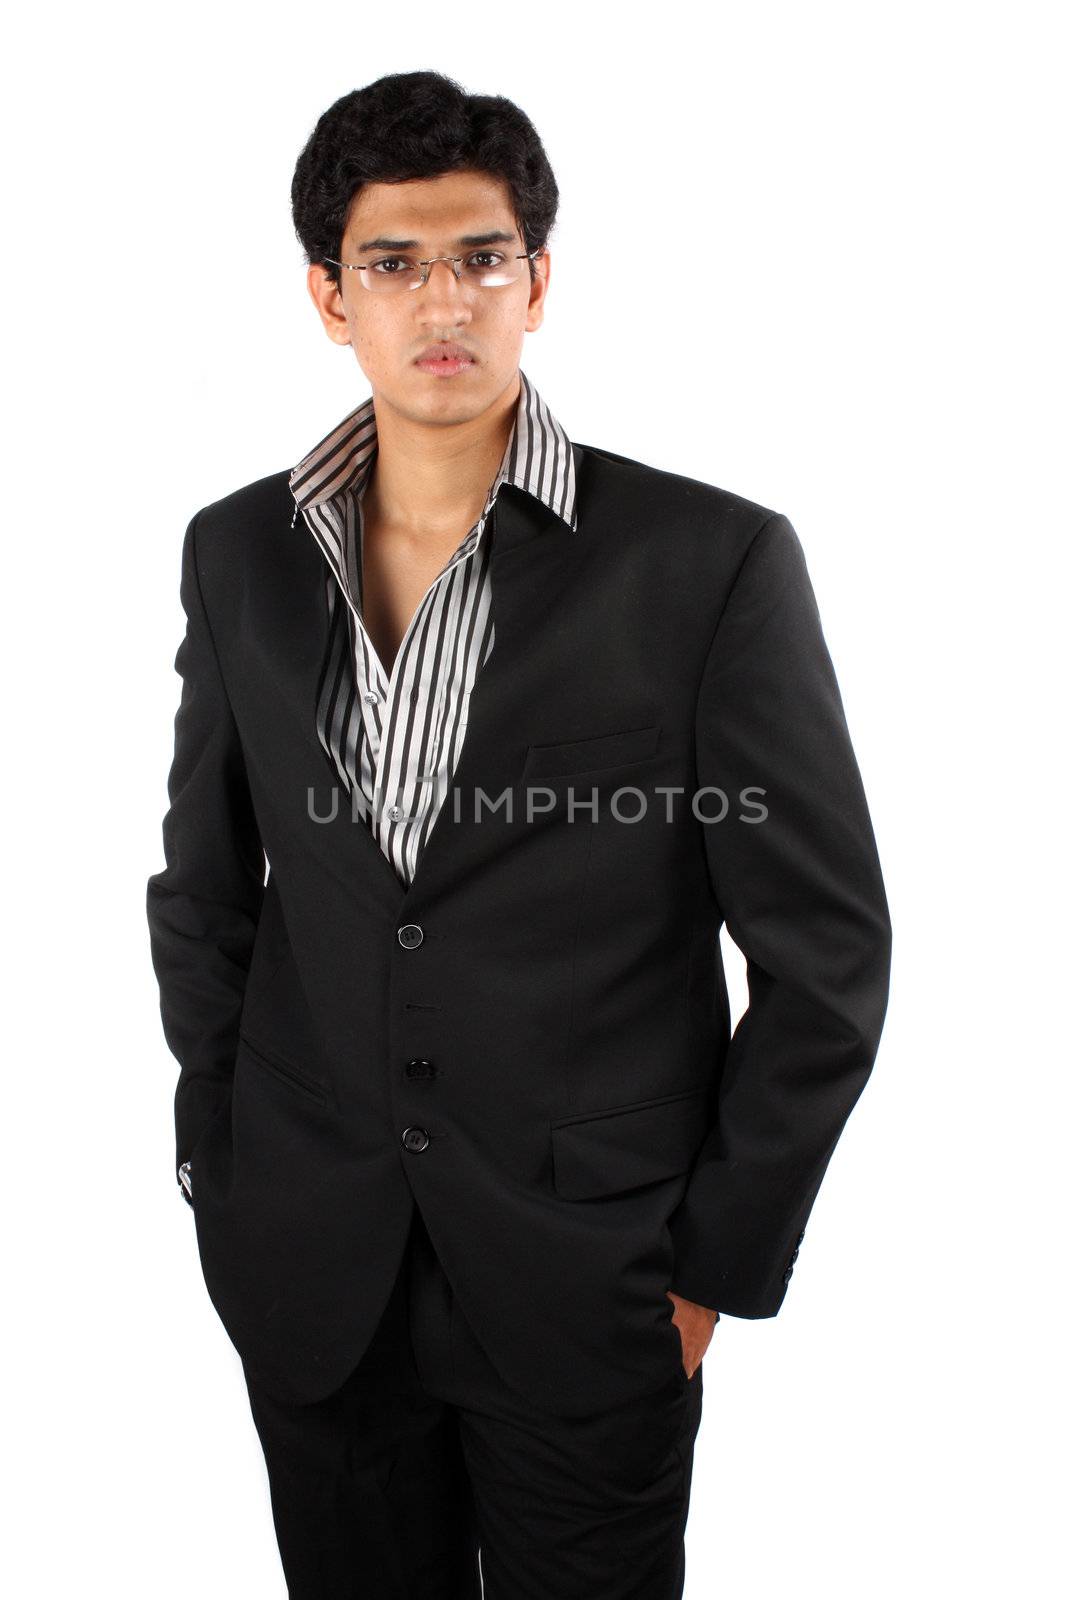 A young Indian entrepreneur, isolated on a white studio background.